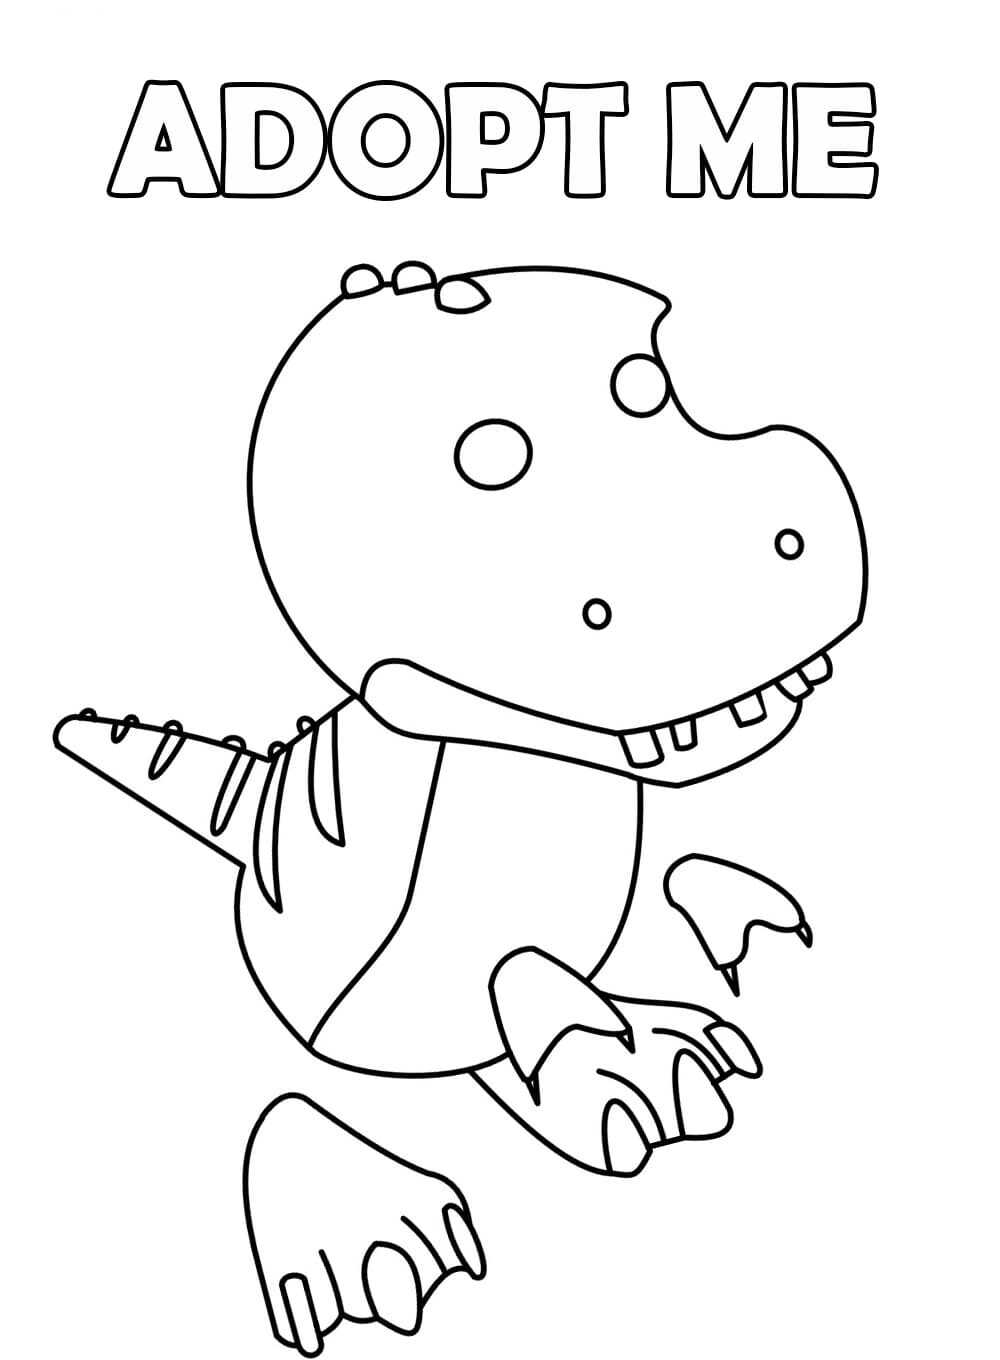 The T-Rex from Adopt me has two small nostrils on its snout and white teeth that can be seen in its mouth Coloring Pages